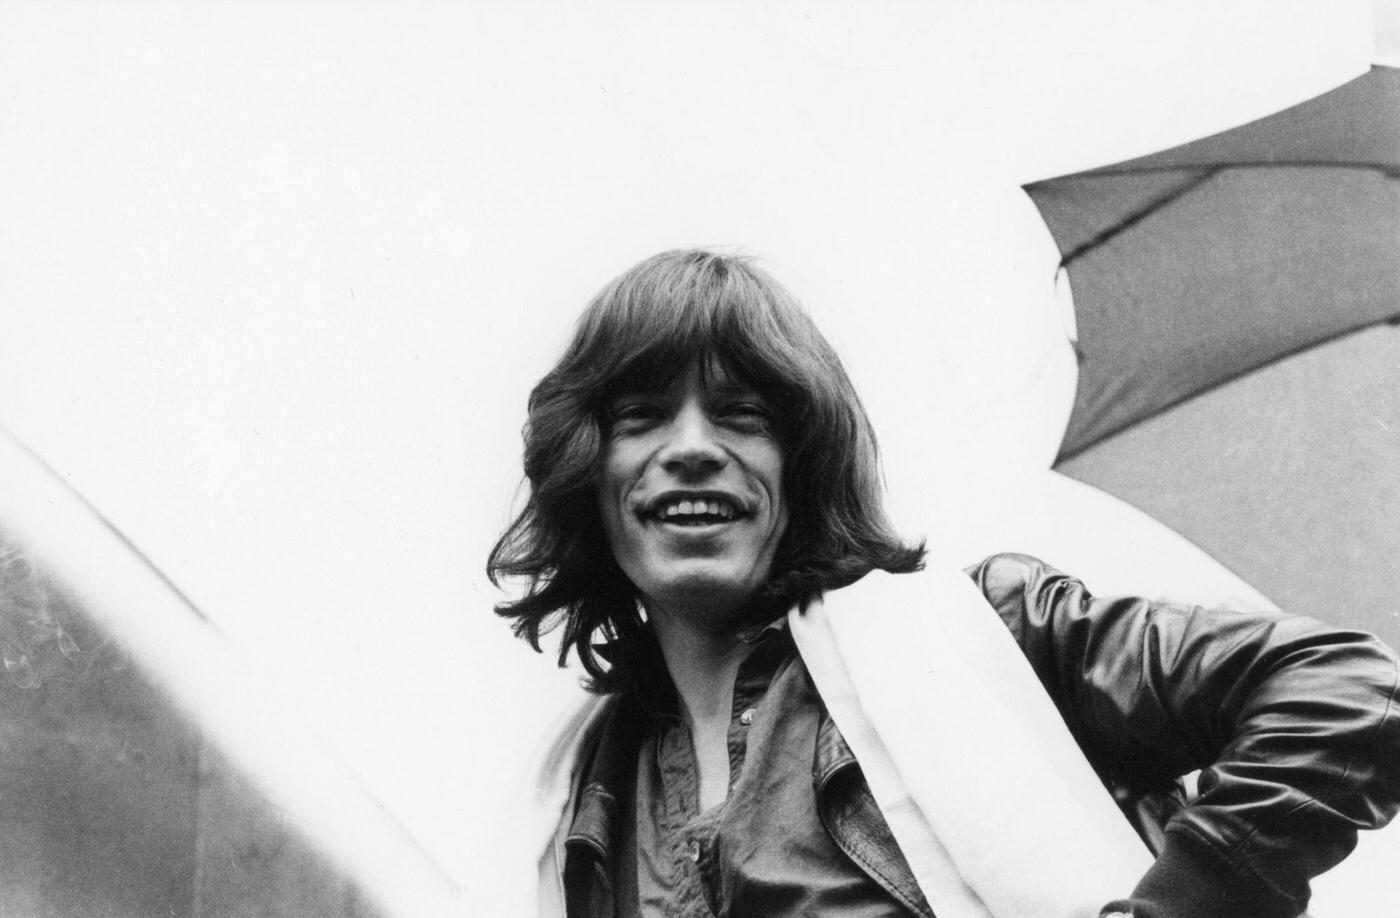 Mick Jagger announces the 'Tour of the Americas '75' on a flatbed truck on 5th Avenue, New York, May 1975.